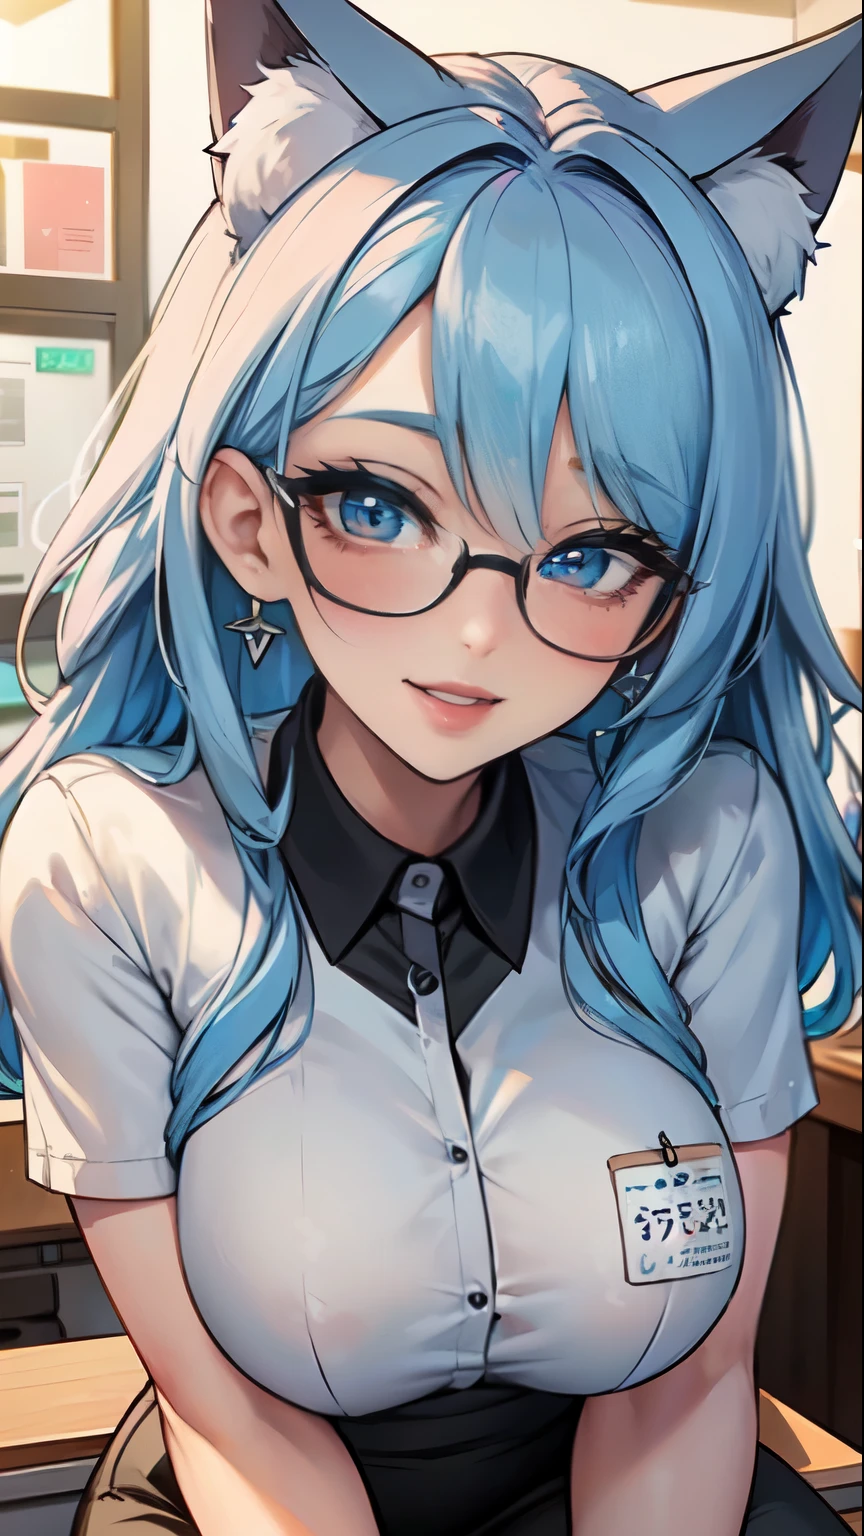 Nsfw,Masterpiece, beautiful art, professional artist, 8k, art style by sciamano240, very detailed face, detailed hair, detailed clothes, detailed fabric, 1girl, perfectly drawn body, beautiful face, long hair, light blue hair , very detailed blue cat eyes, big smile, wearing trendy office clothes, black thigh boots, black pencil skirt, glasses, rosey cheeks, coffee shop setting, model headshot , zoom in face, show details in eyes, upclose view, looking at viewer, excited expression,